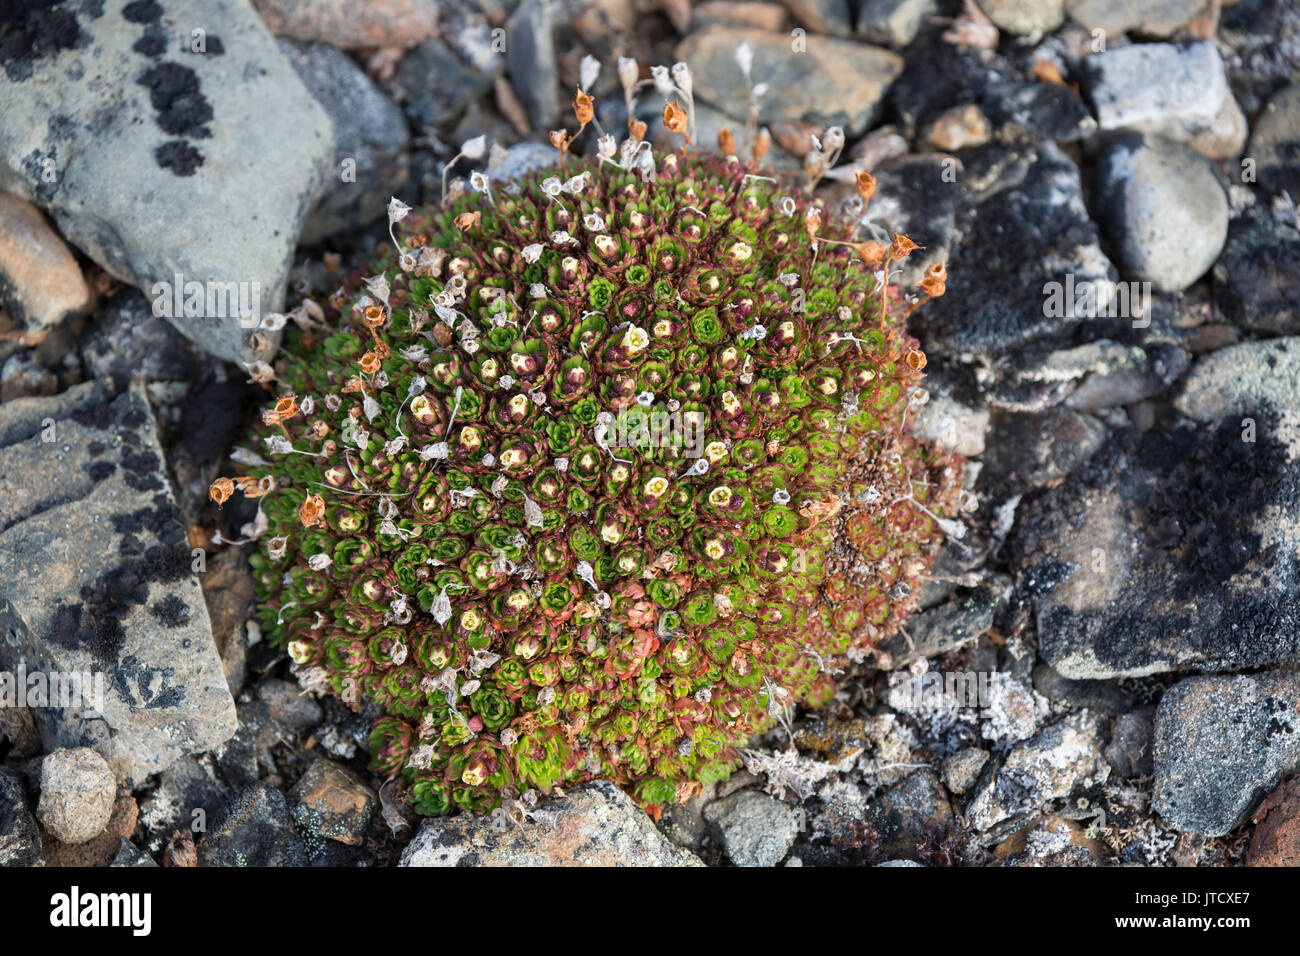 Tufted Saxifrage, Saxifraga cespitosa, compact plant before flowering, growing on the tundra. Taken in June, Spitsbergen, Svalbard, Norway Stock Photo